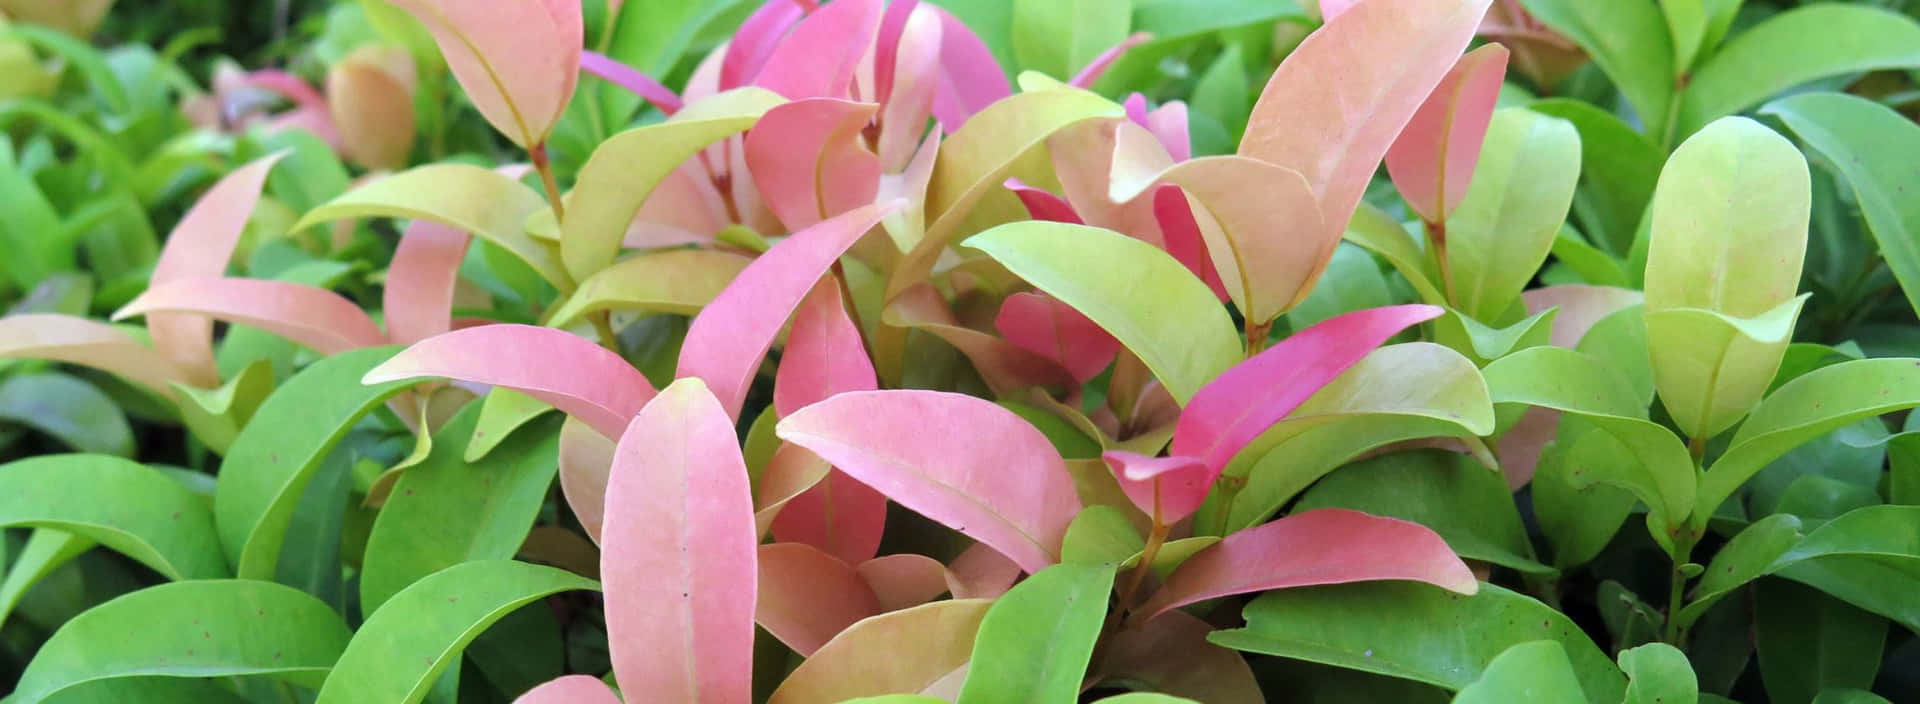 A Pink And Green Plant With Leaves Wallpaper